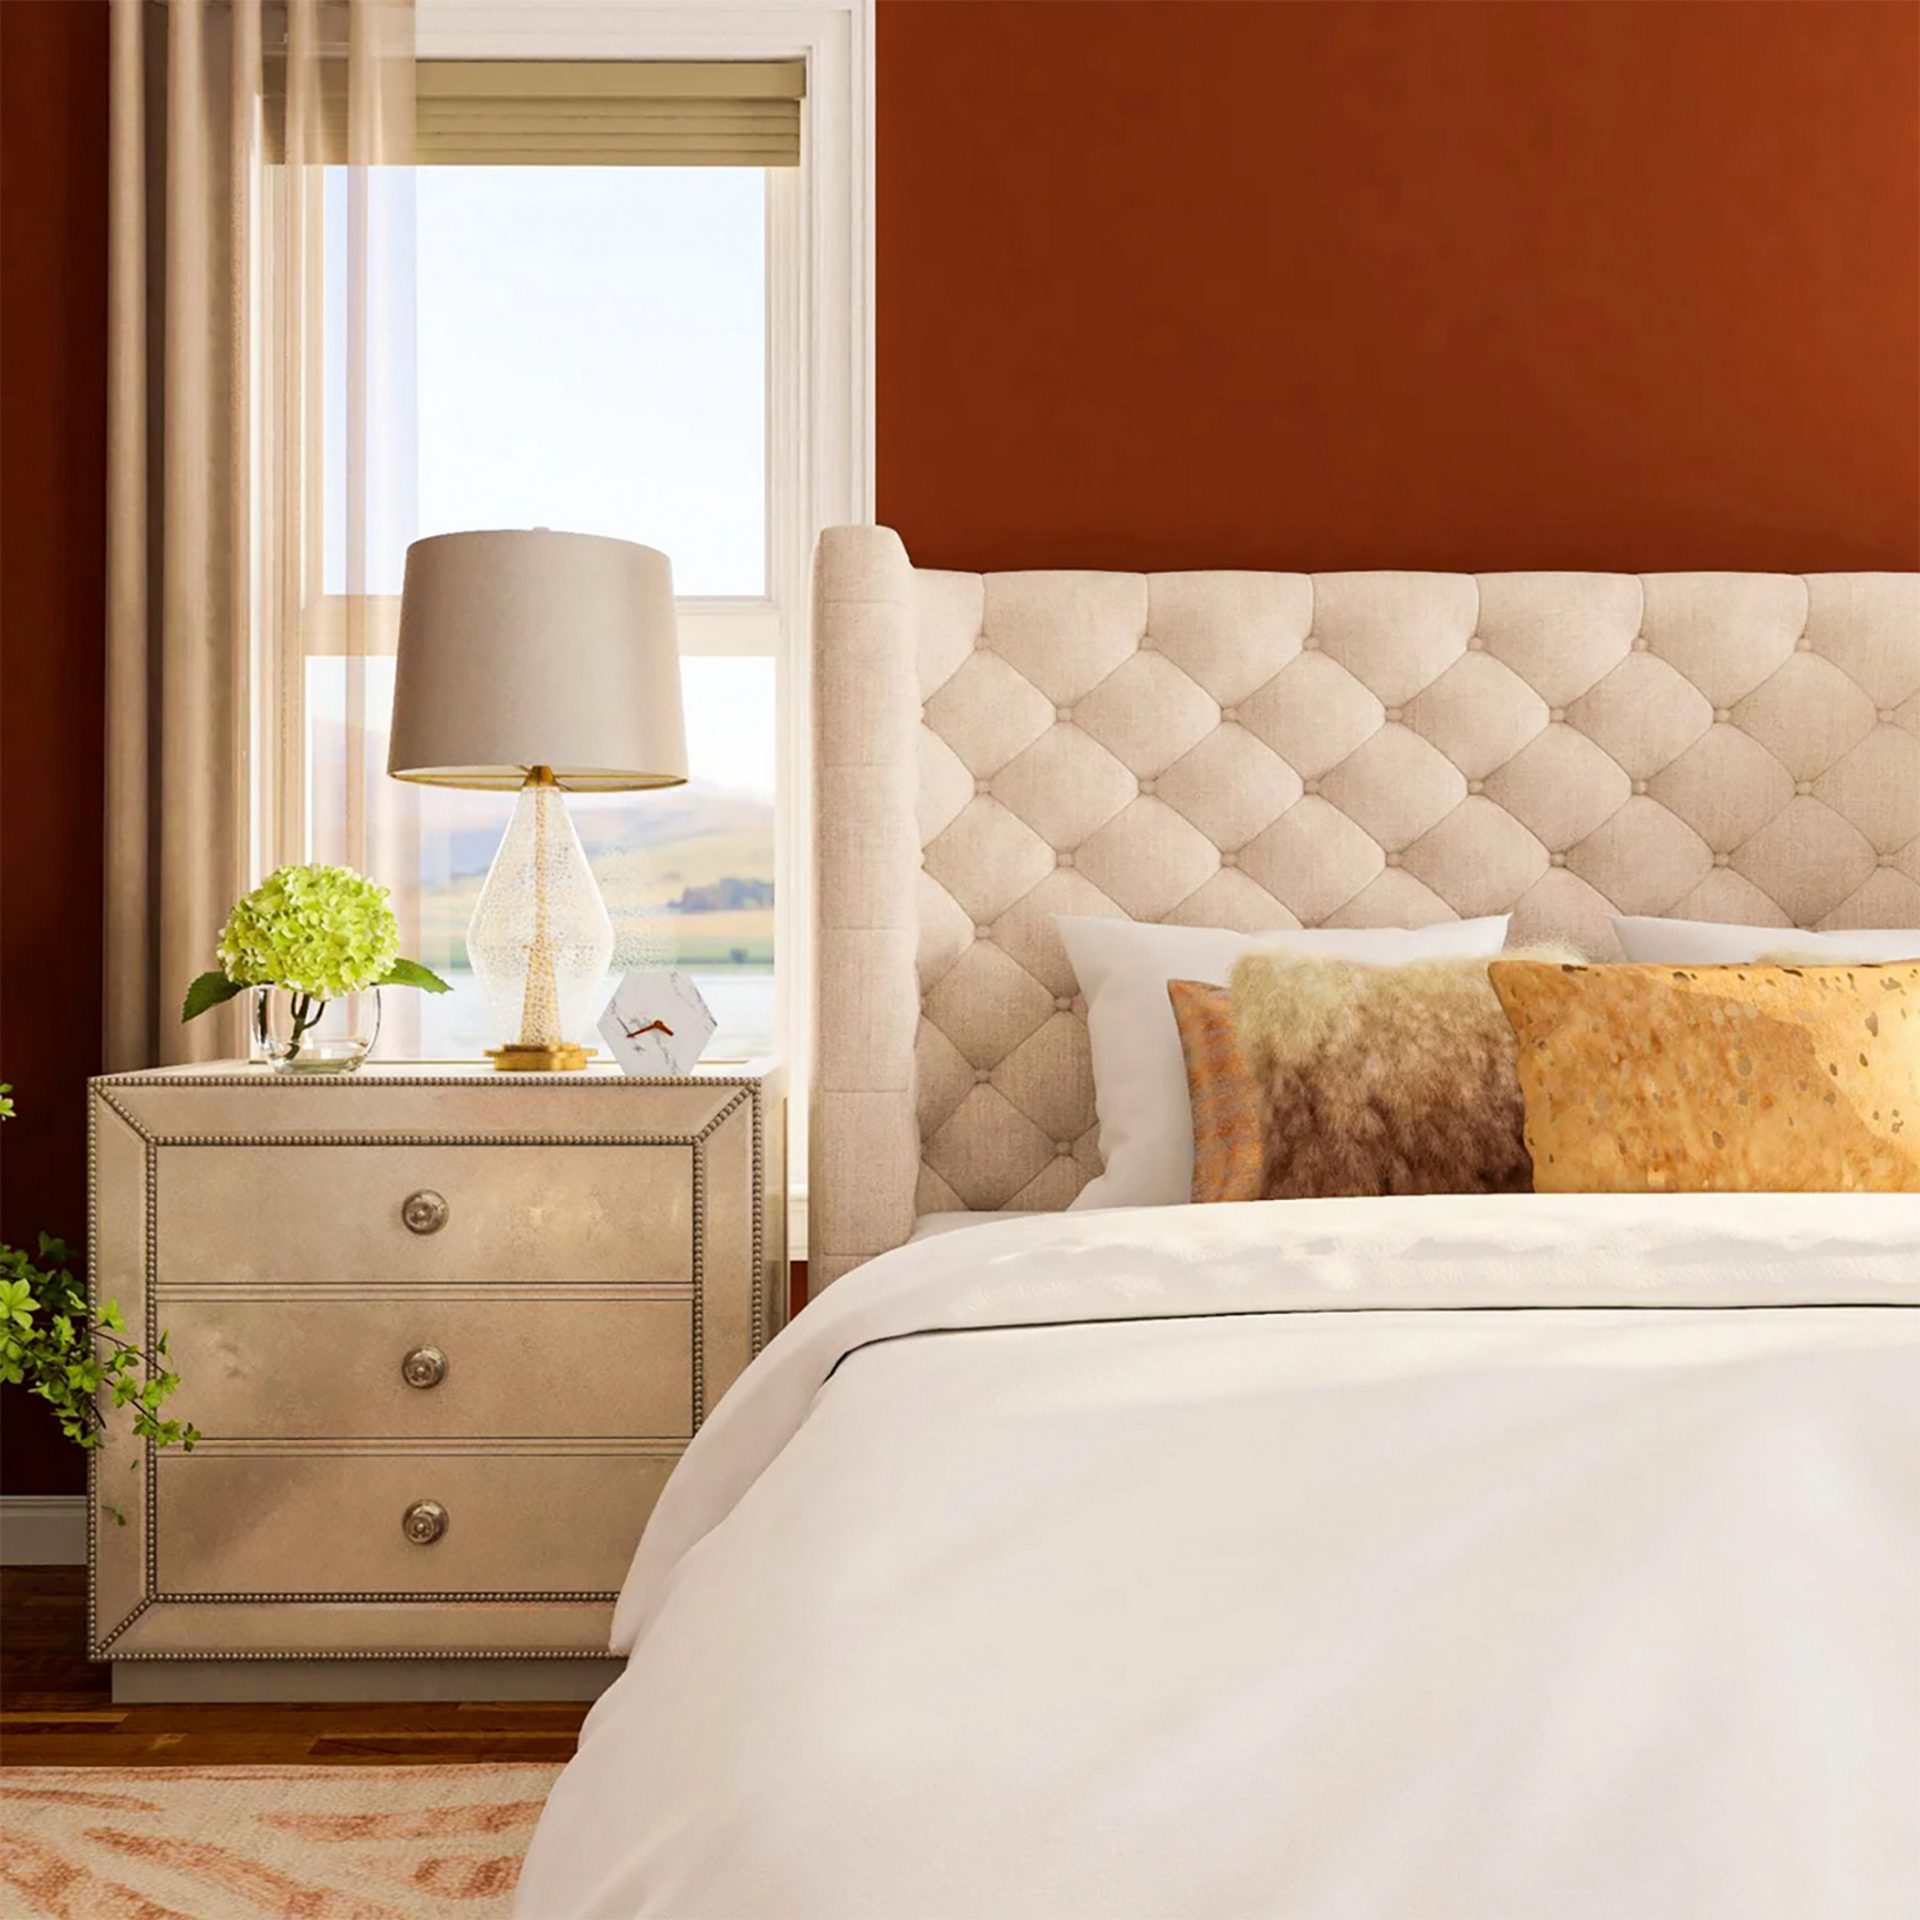 Headboard Ideas to Make a Statement in Your Bedroom